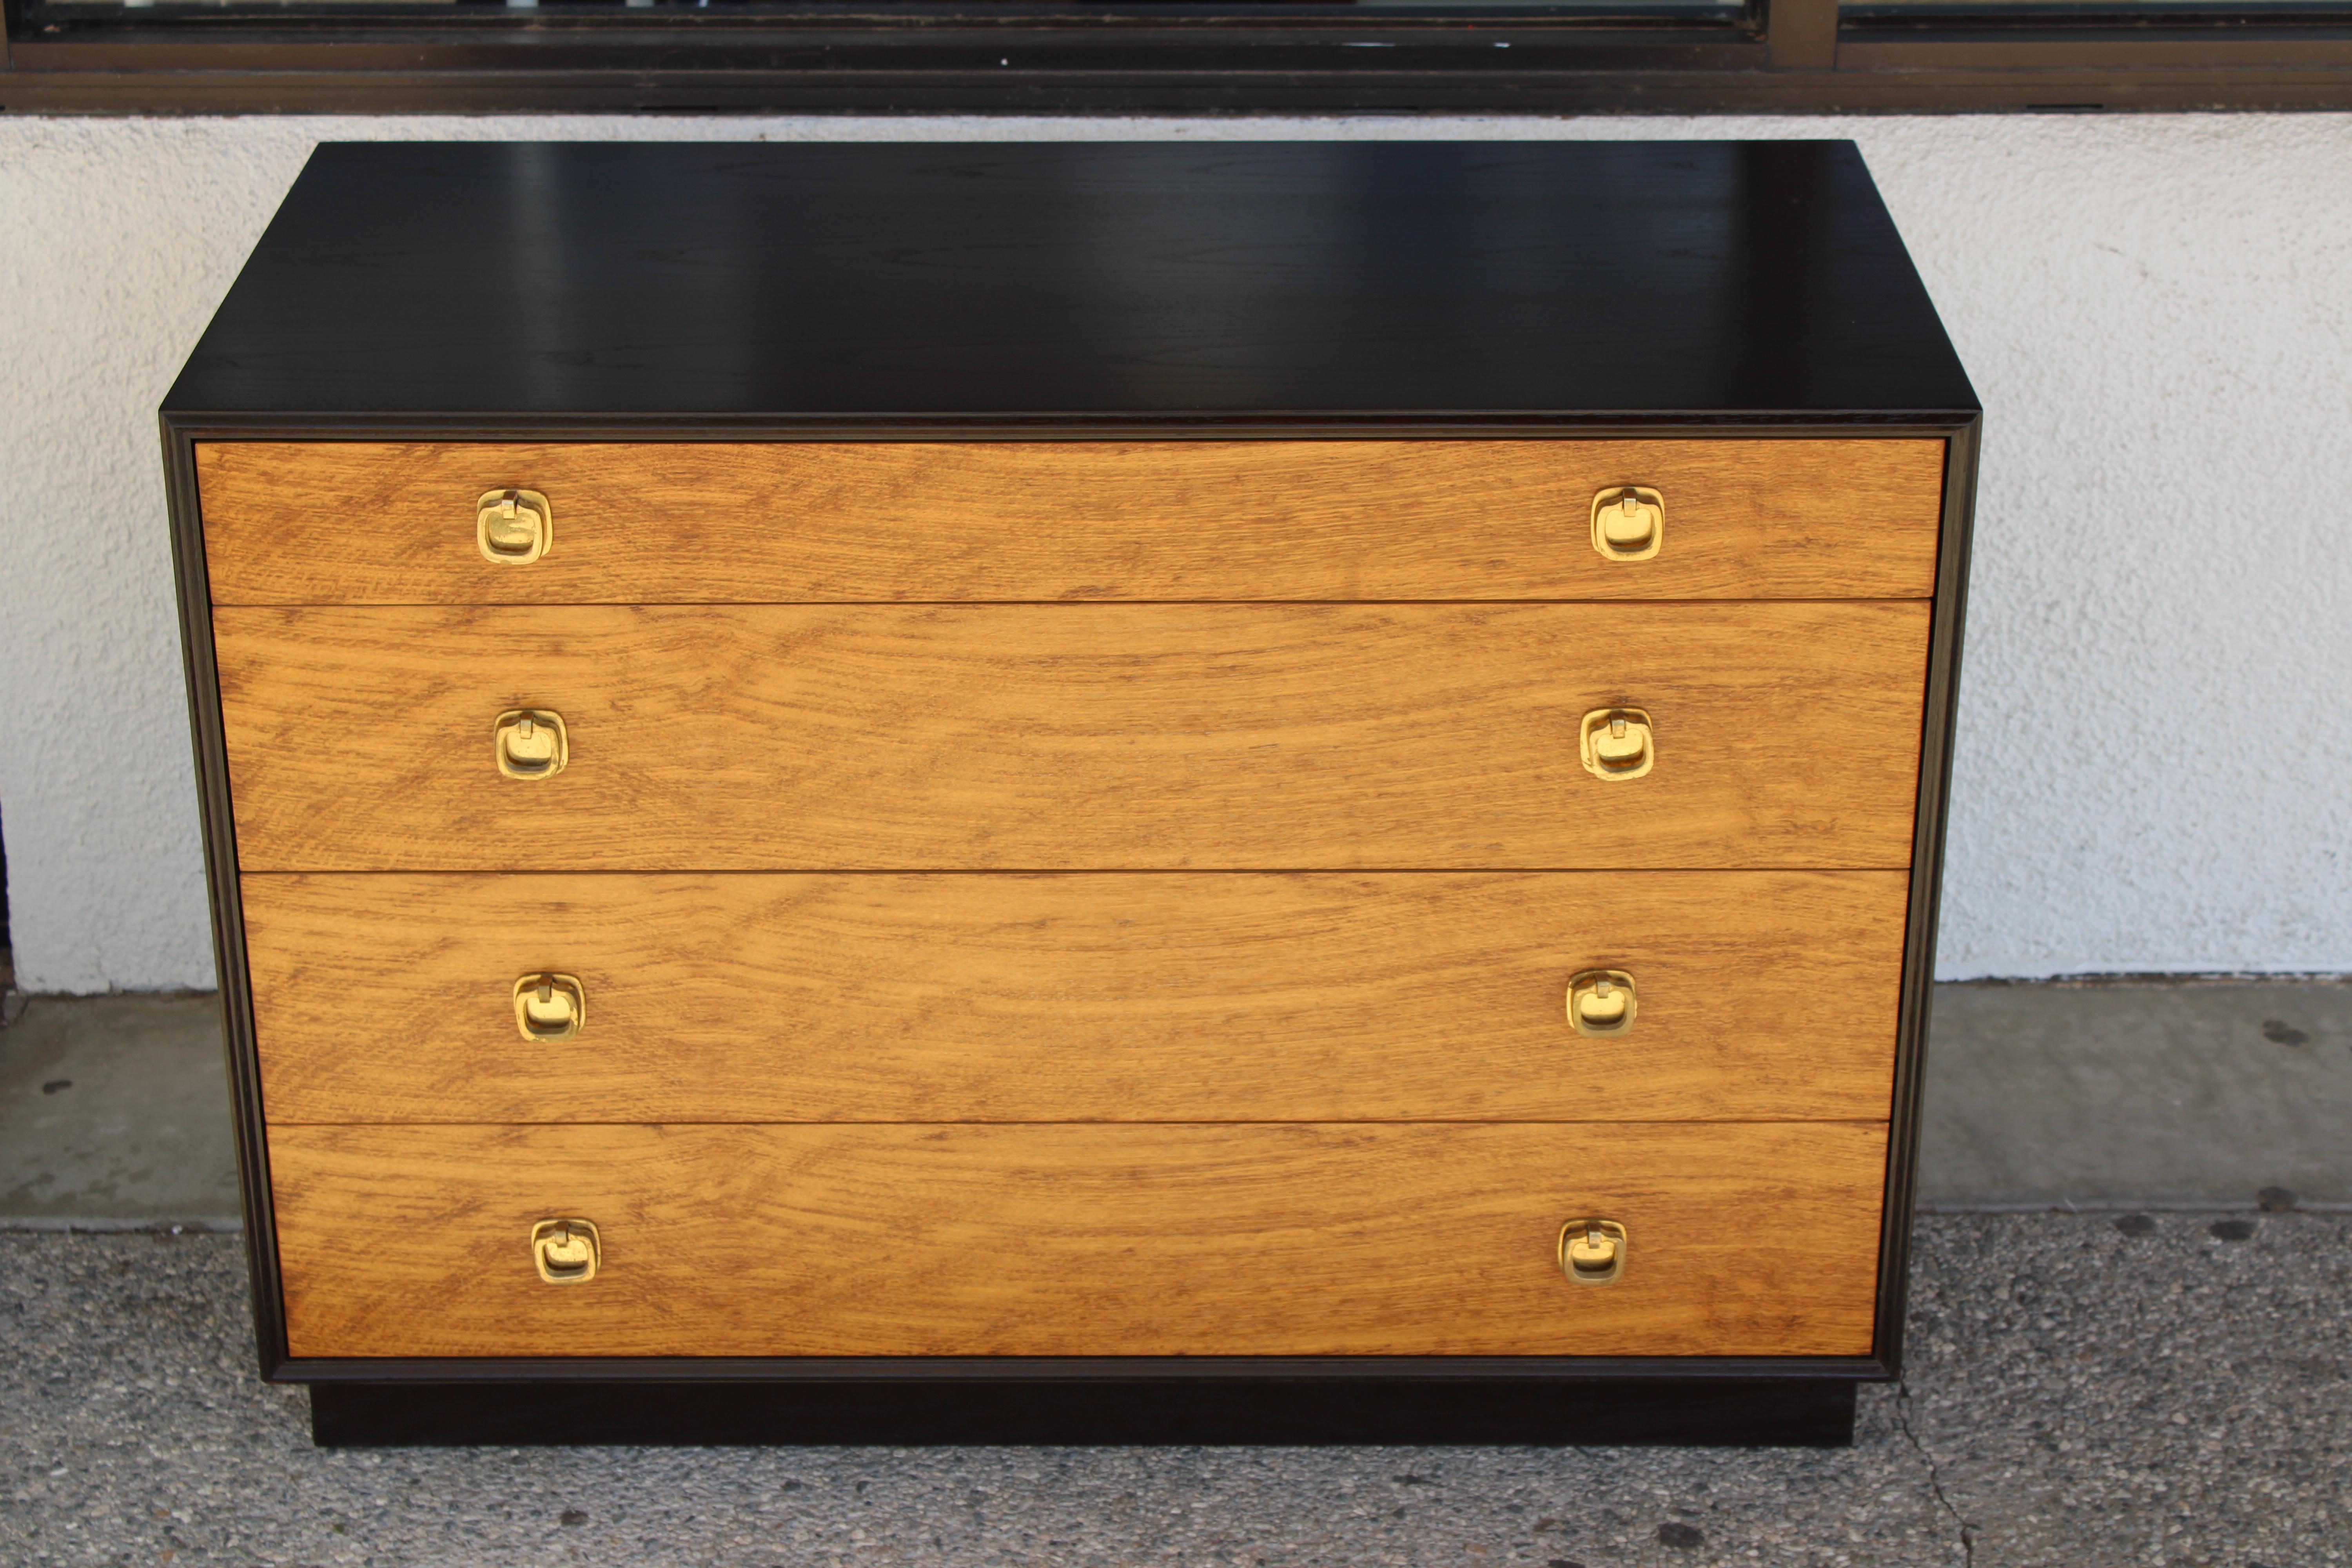 Pair of dressers with brass pulls by Edward Wormley for Dunbar, Berne Indiana.  Each dresser has 4 drawers with white laminate lined interiors.  Dressers measures 36